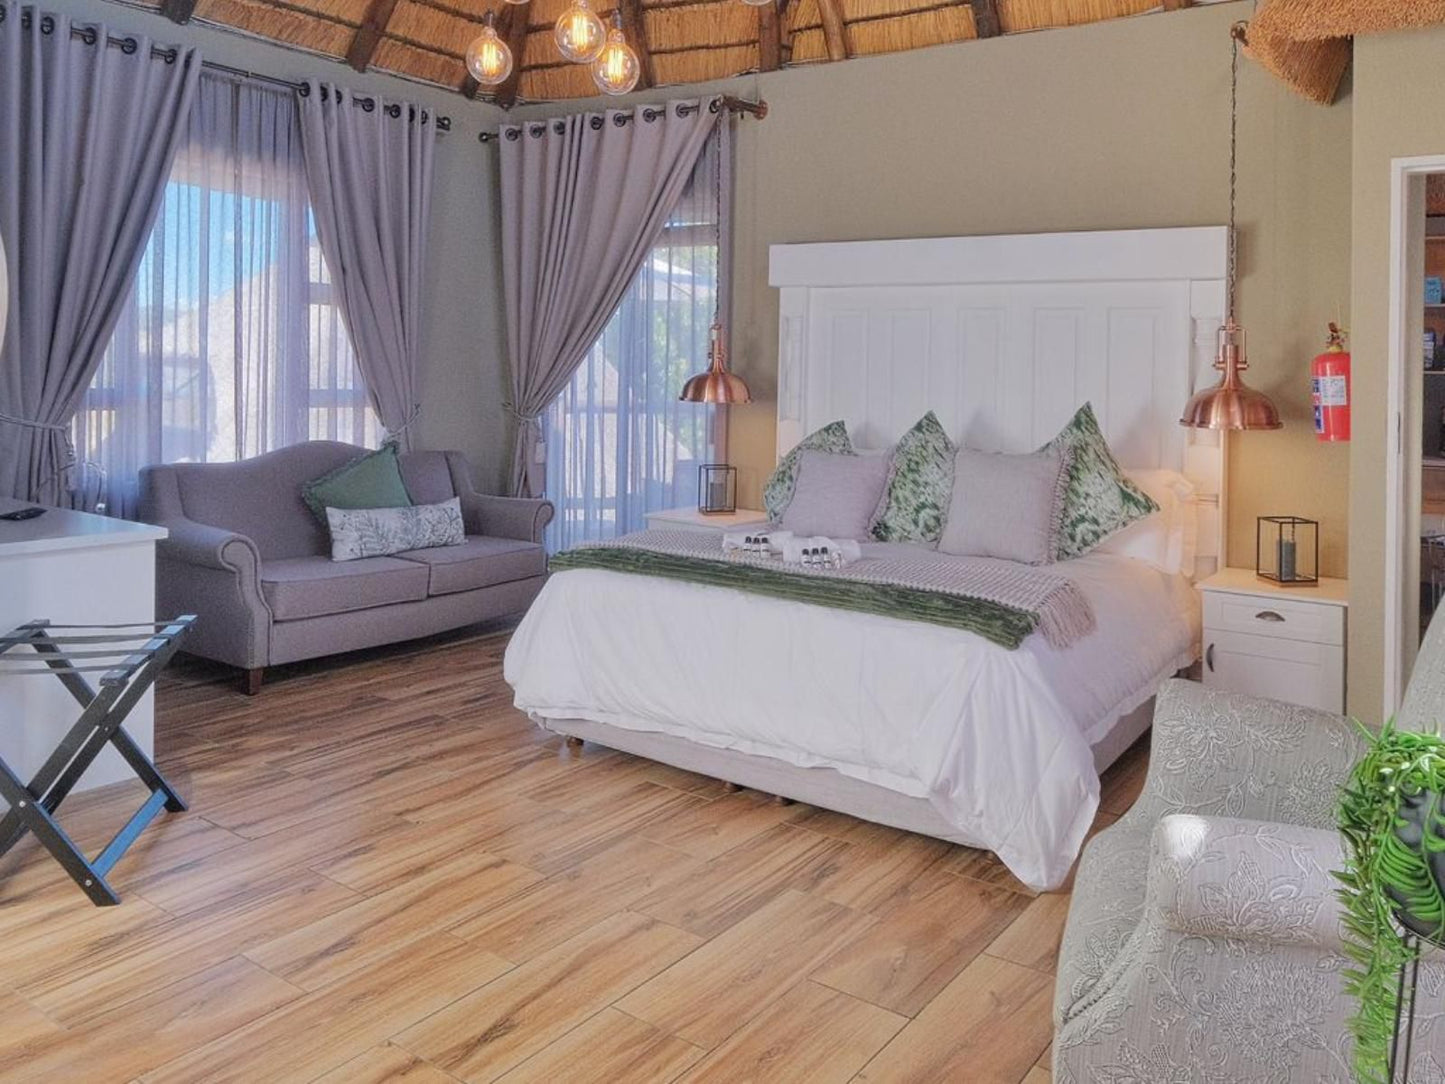 The Perfect Lodge Bethlehem Free State South Africa Bedroom